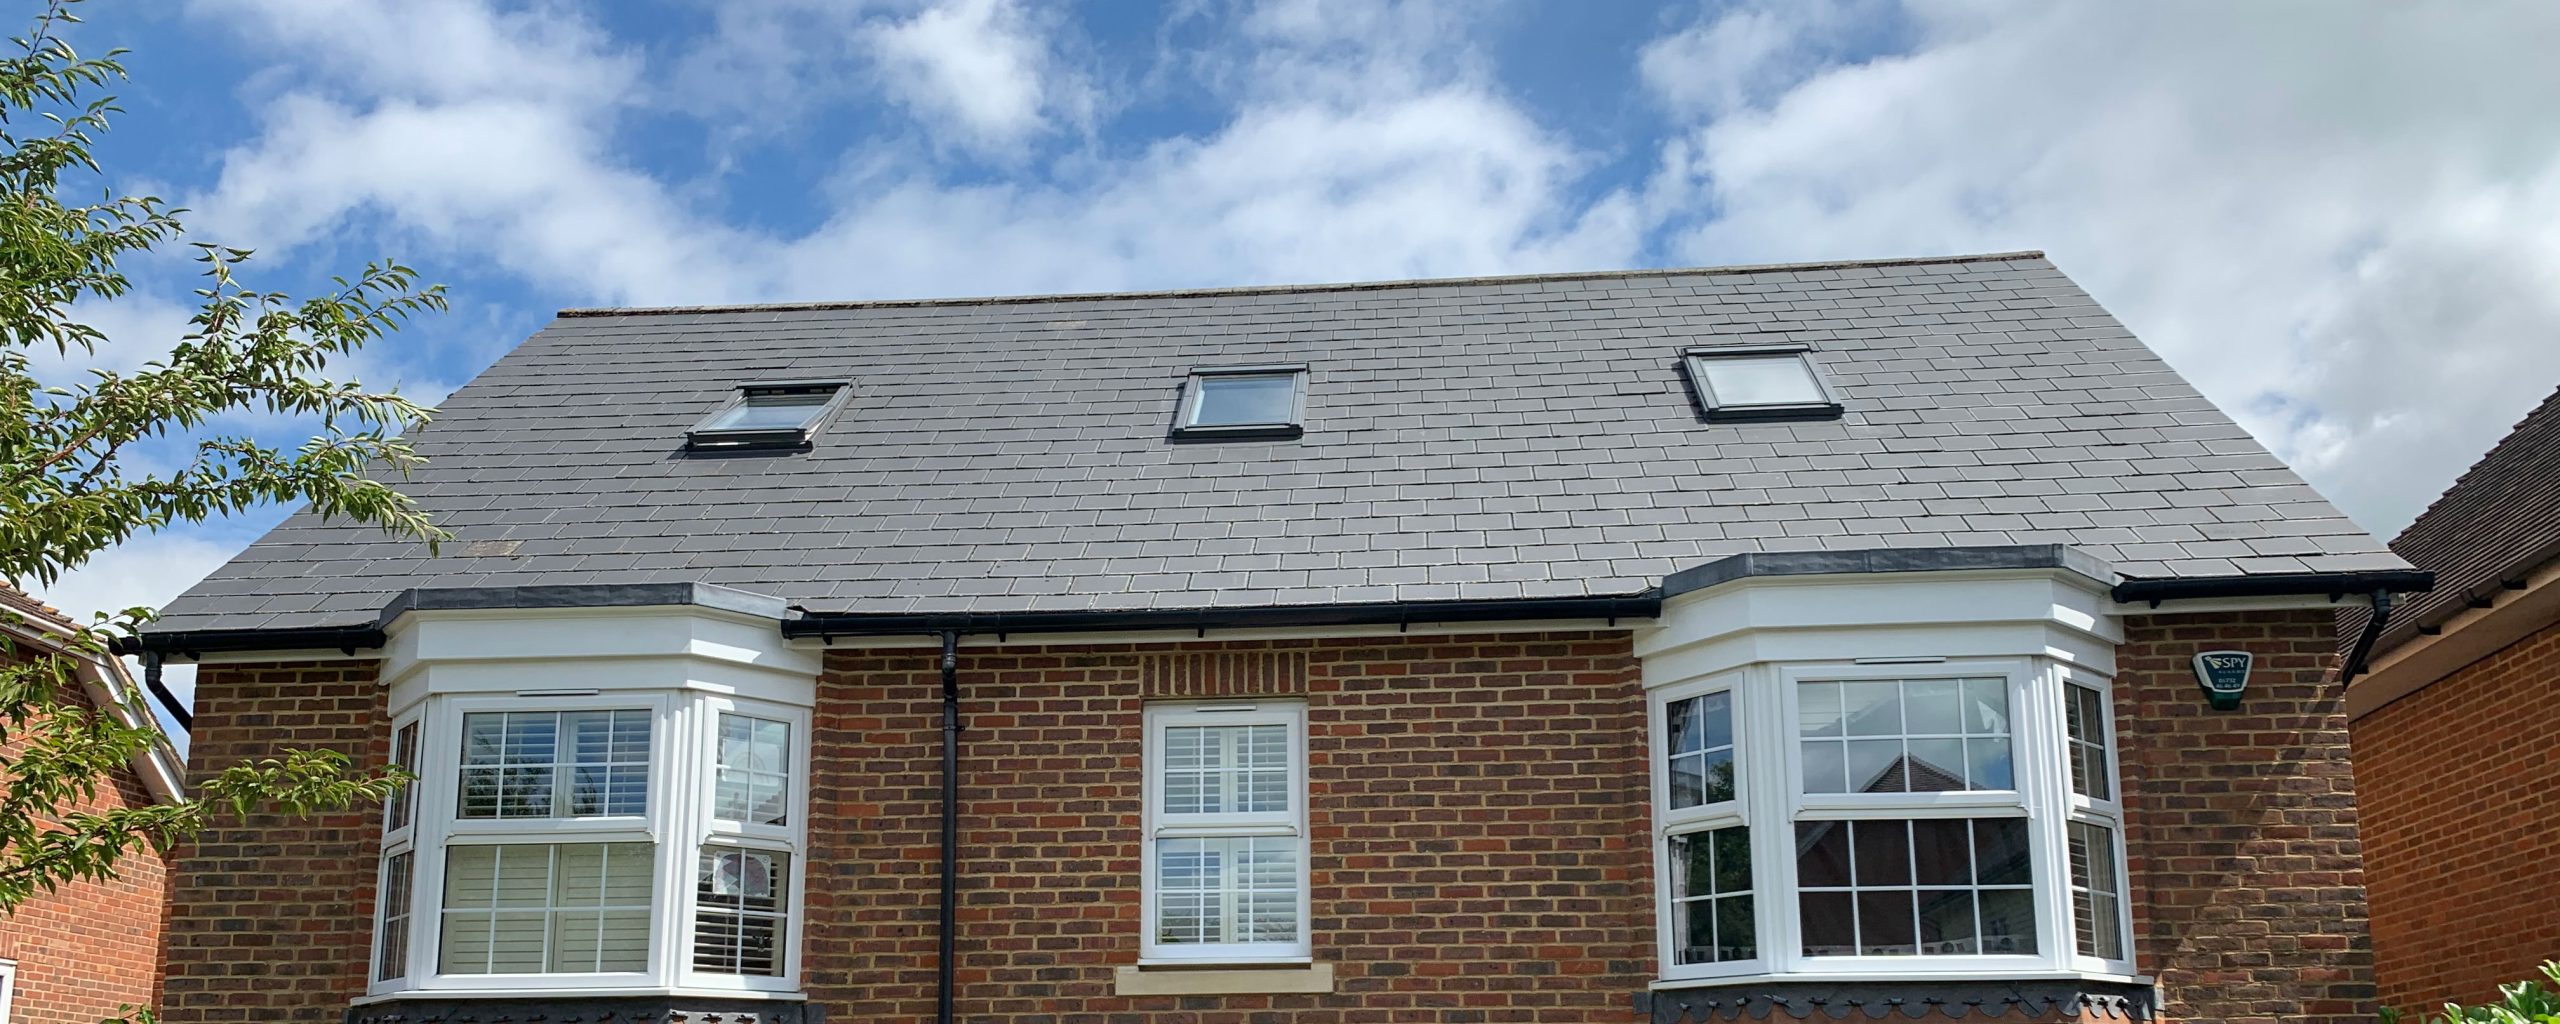 Slate Roof Defects Photo Guide